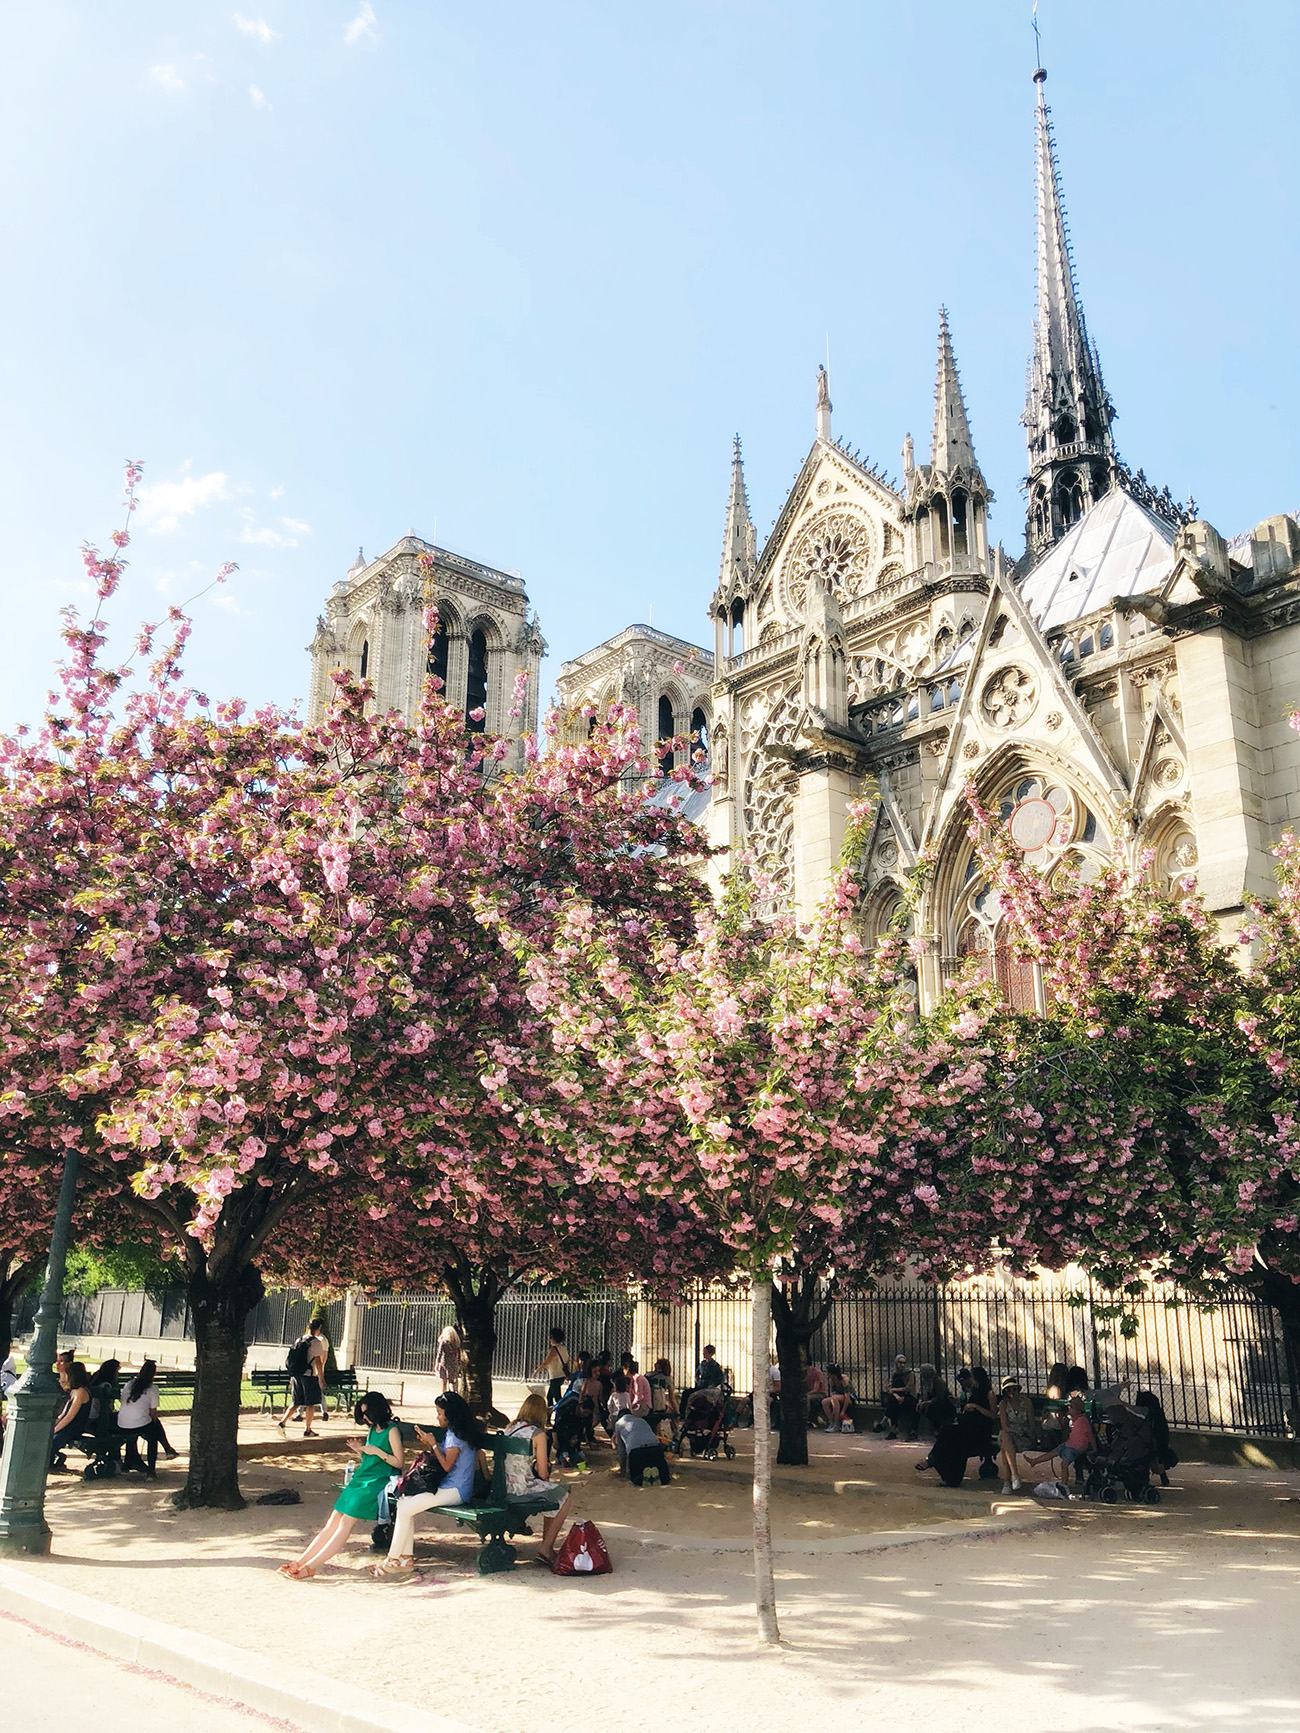 Notre Dame with Cherry Blossoms